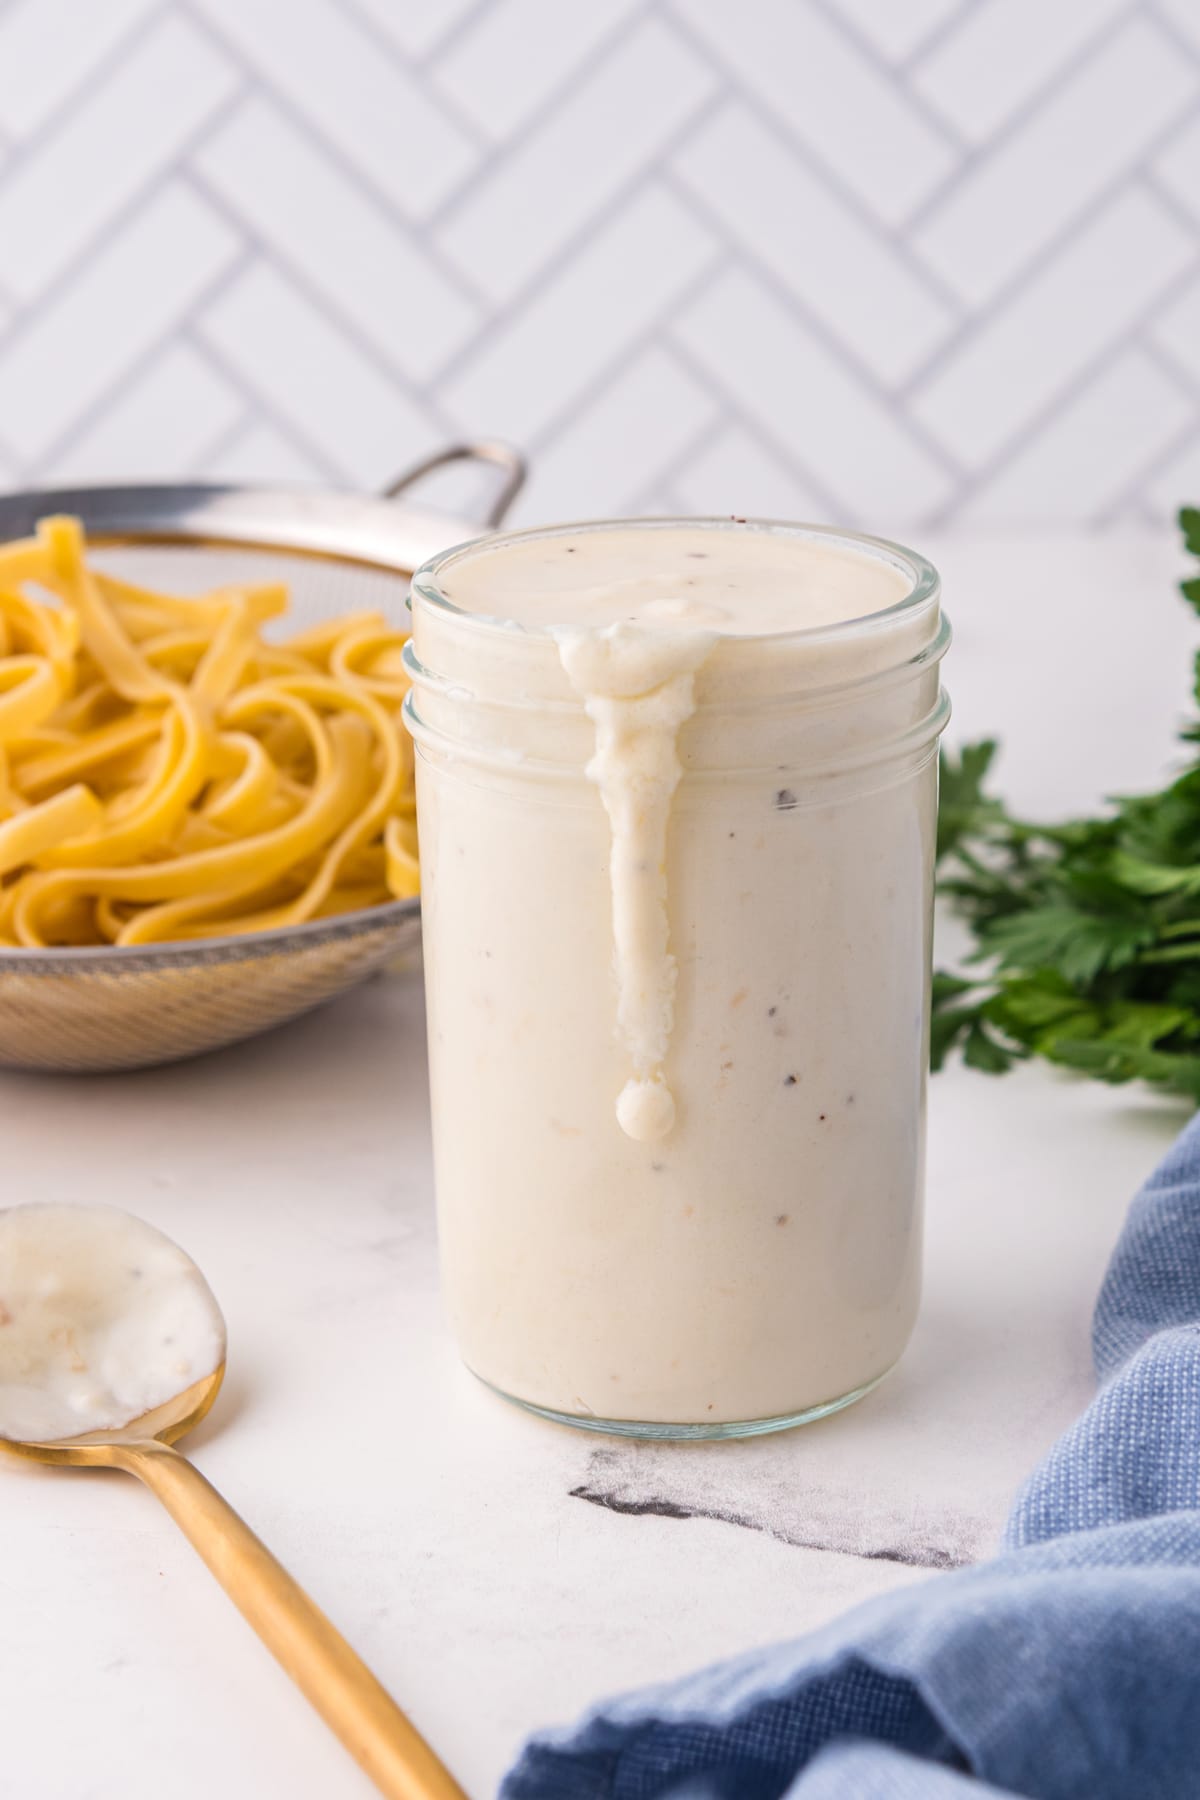 Homemade alfredo sauce is a combination of Unsalted butter, Garlic, minced (or you can use garlic powder), All-purpose flour, Heavy cream, Whole milk, Black pepper (you can also use white pepper), Fresh parmesan cheese, and shredded Pecorino Romano cheese